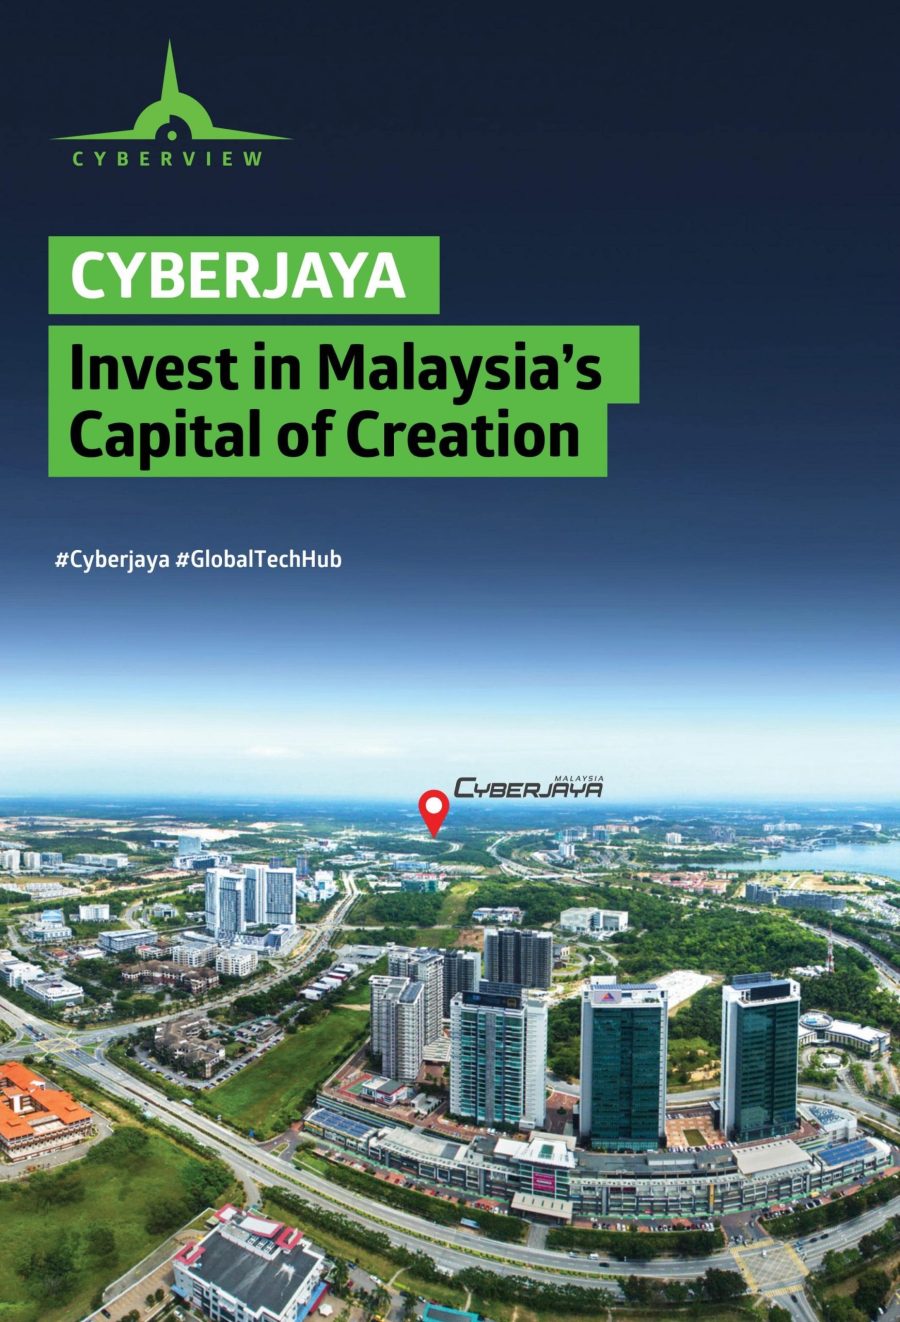 Cyberview Investment Kit